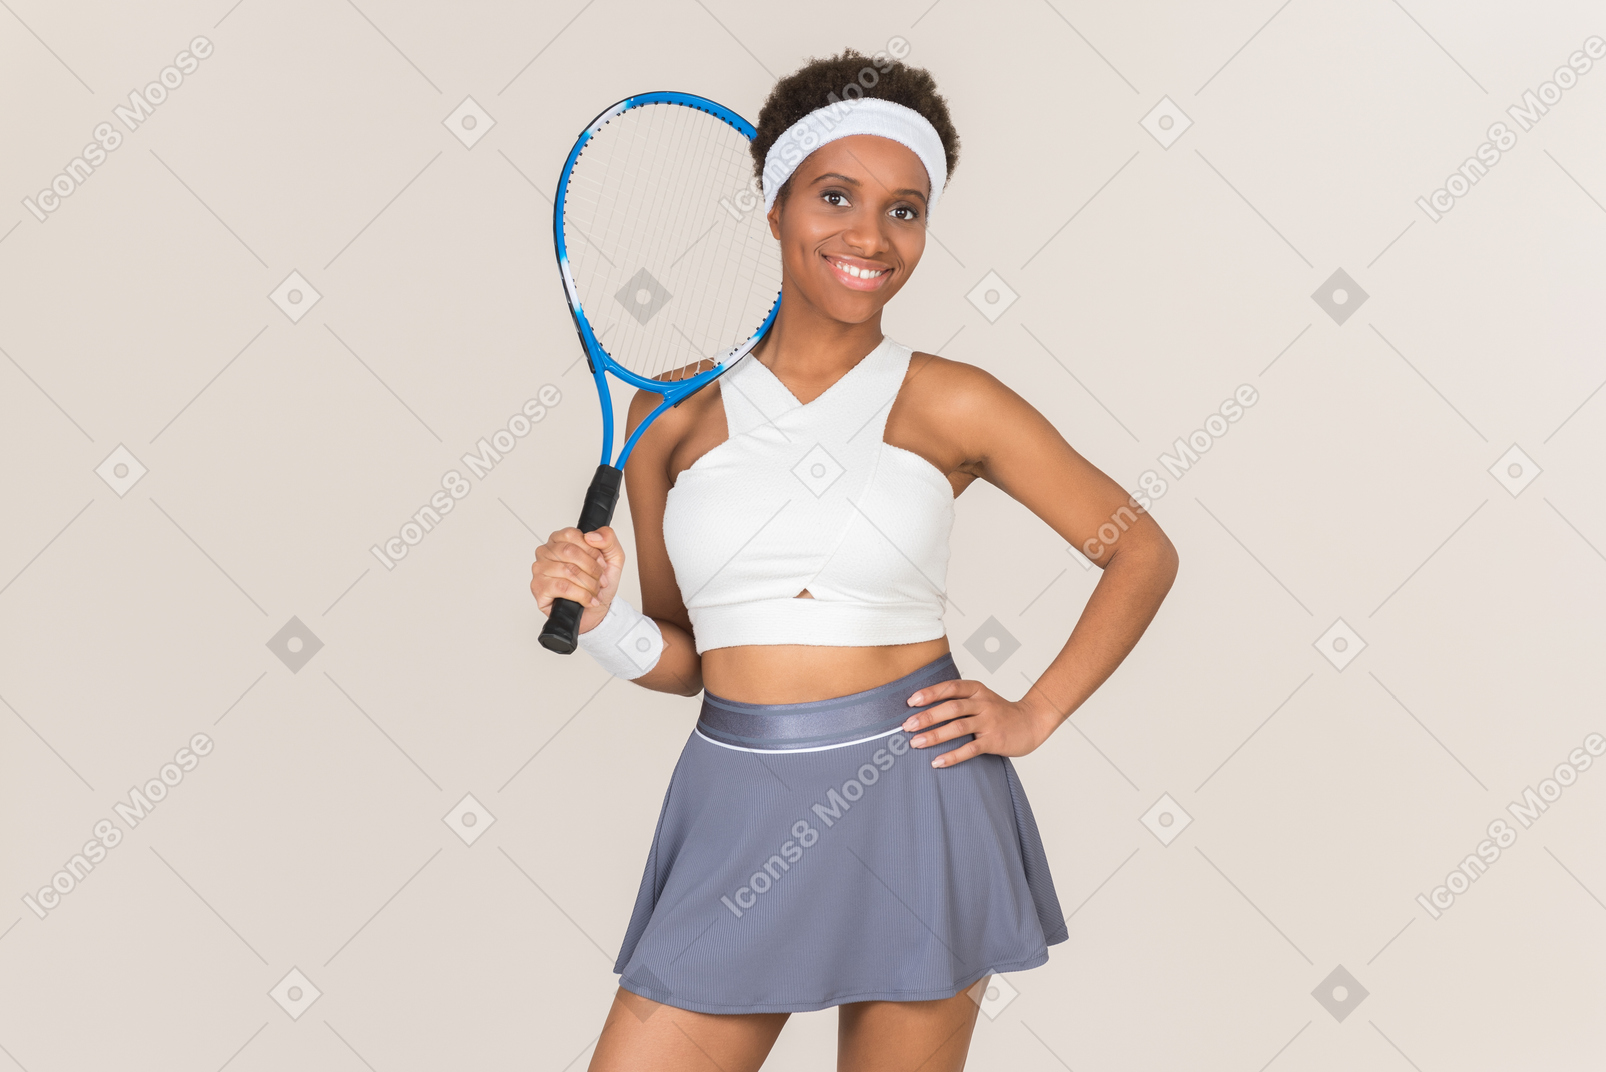 You know, i'm really great in tennis